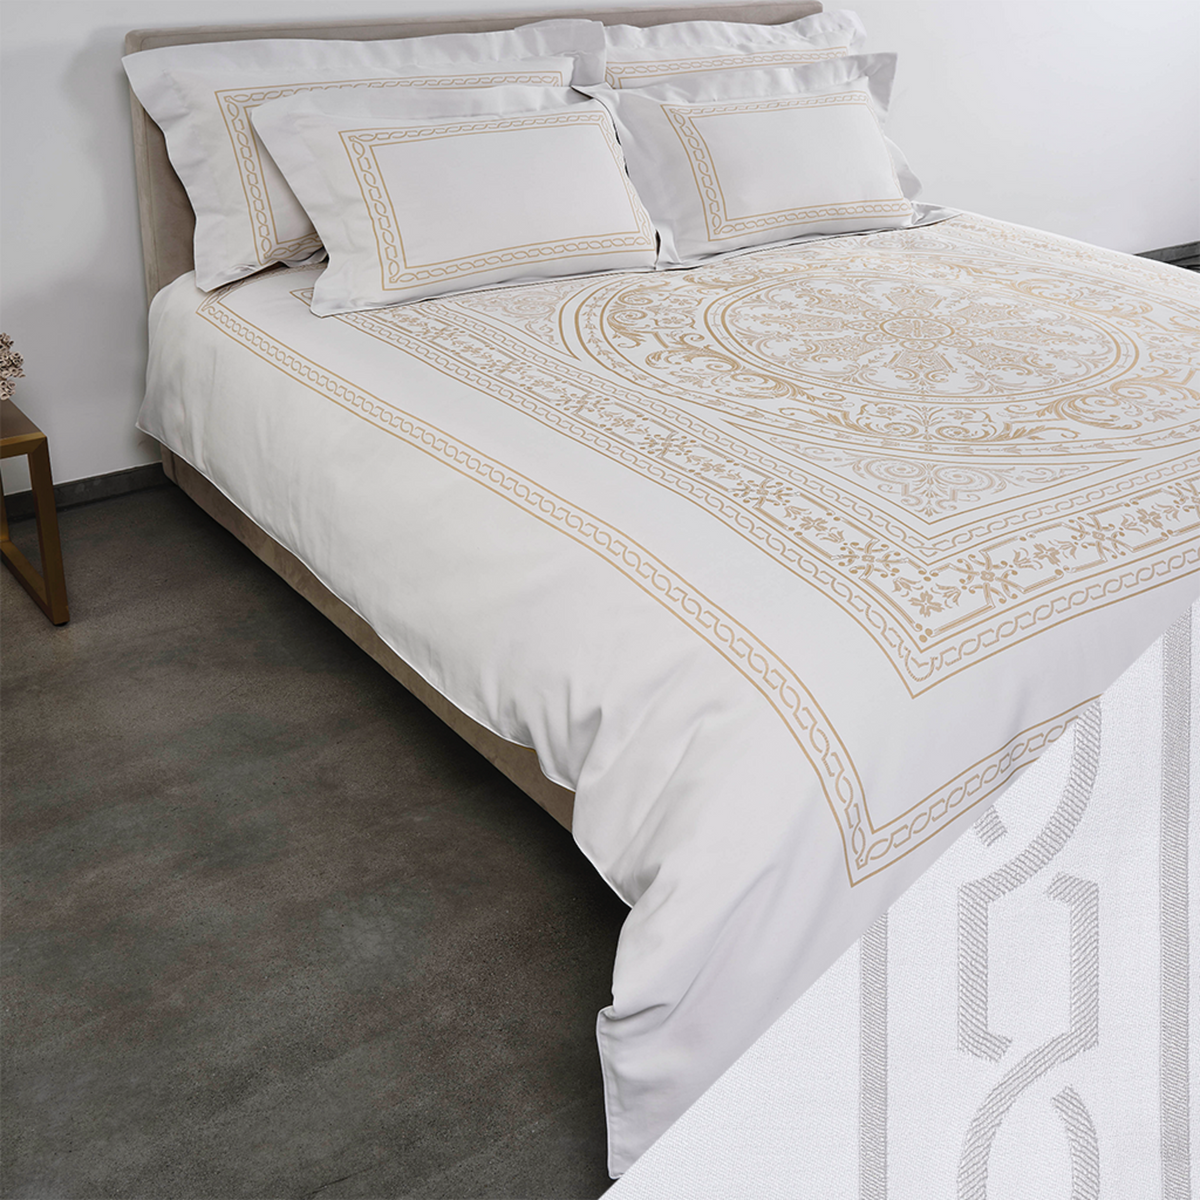 Celso de Lemos Versailles Bedding Collection with Perle Swatch